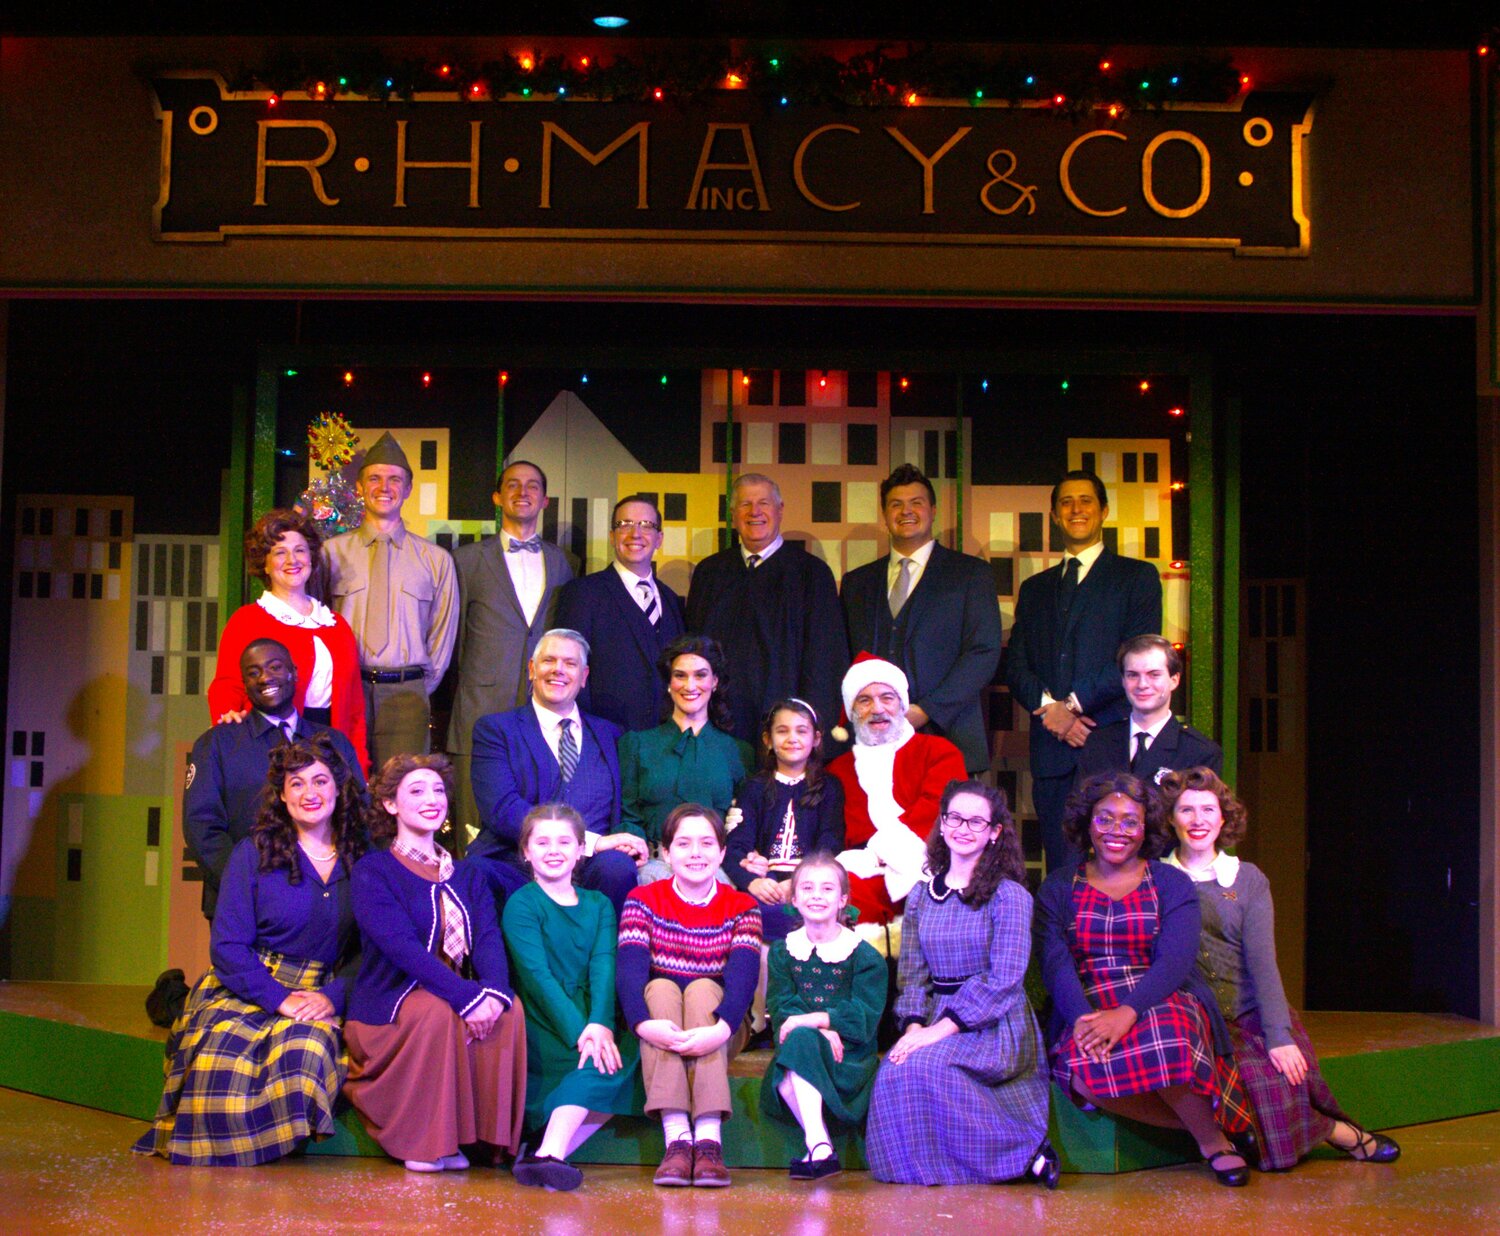 "Miracle on 34th Street" is this year’s Christmas show at the Alhambra Theatre & Dining in Jacksonville.